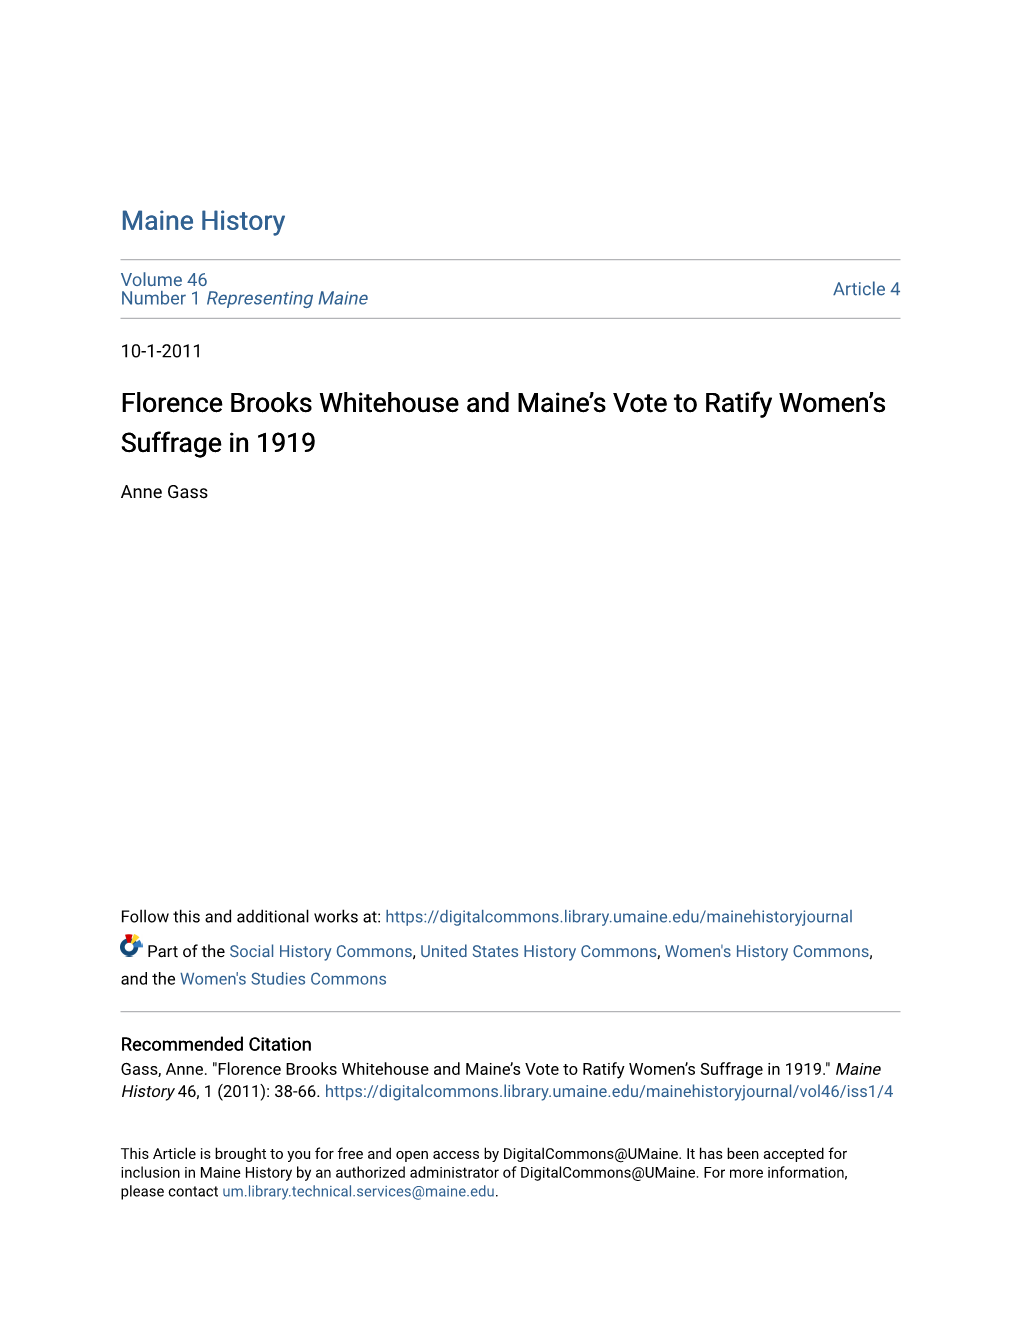 Florence Brooks Whitehouse and Maine's Vote to Ratify Women's